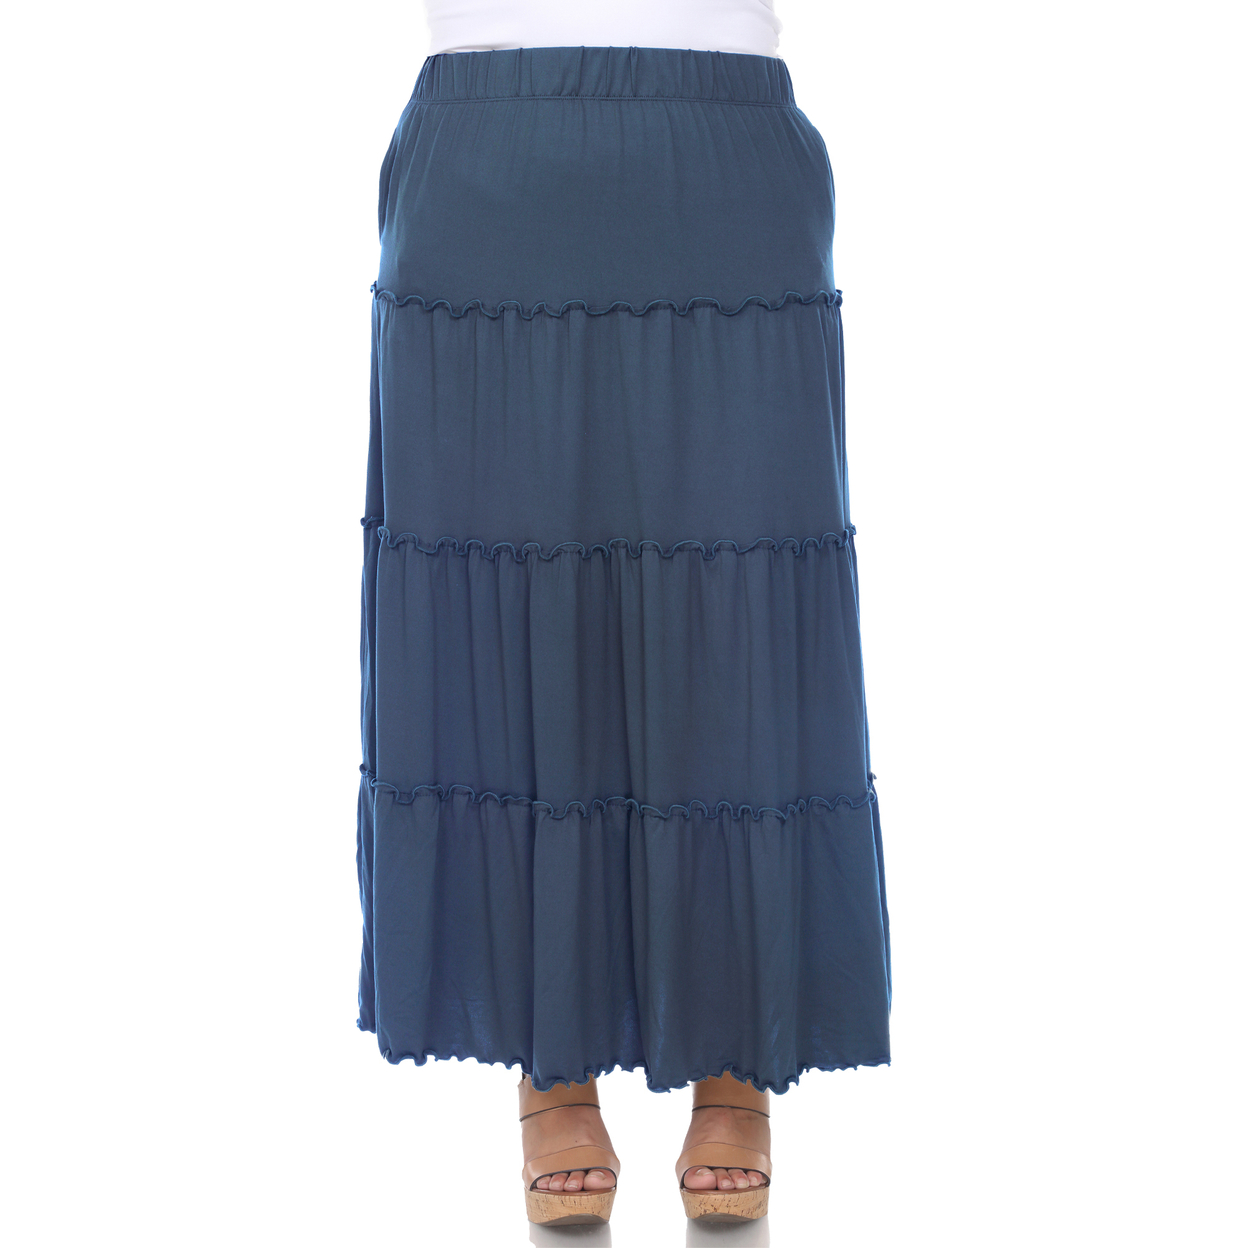 White Mark Women's Plus Size Tiered Maxi Skirt With Pockets - Denim Blue, 3x